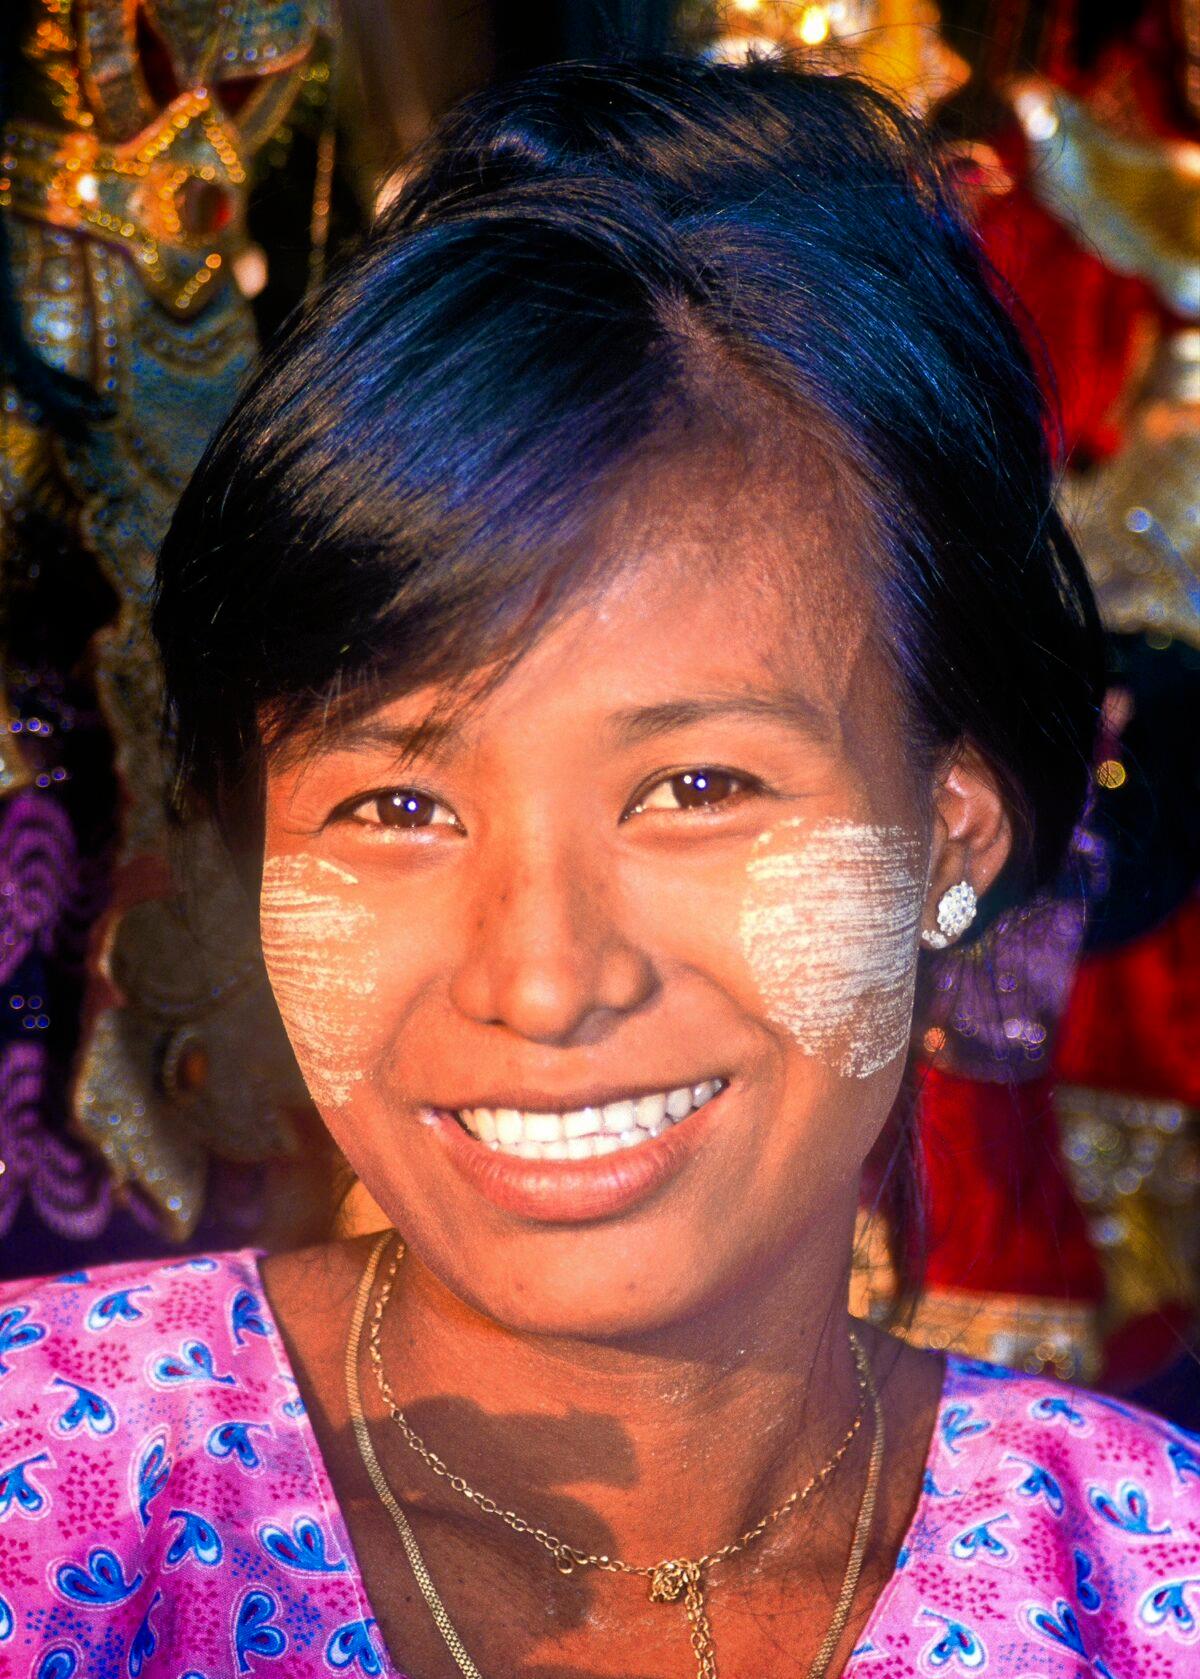 Most Burmese women decorate their faces with thanaka, a fragrant yellow sandalwood paste that is considered both a beauty mark and a sunscreen. (Fred J. Eckert)